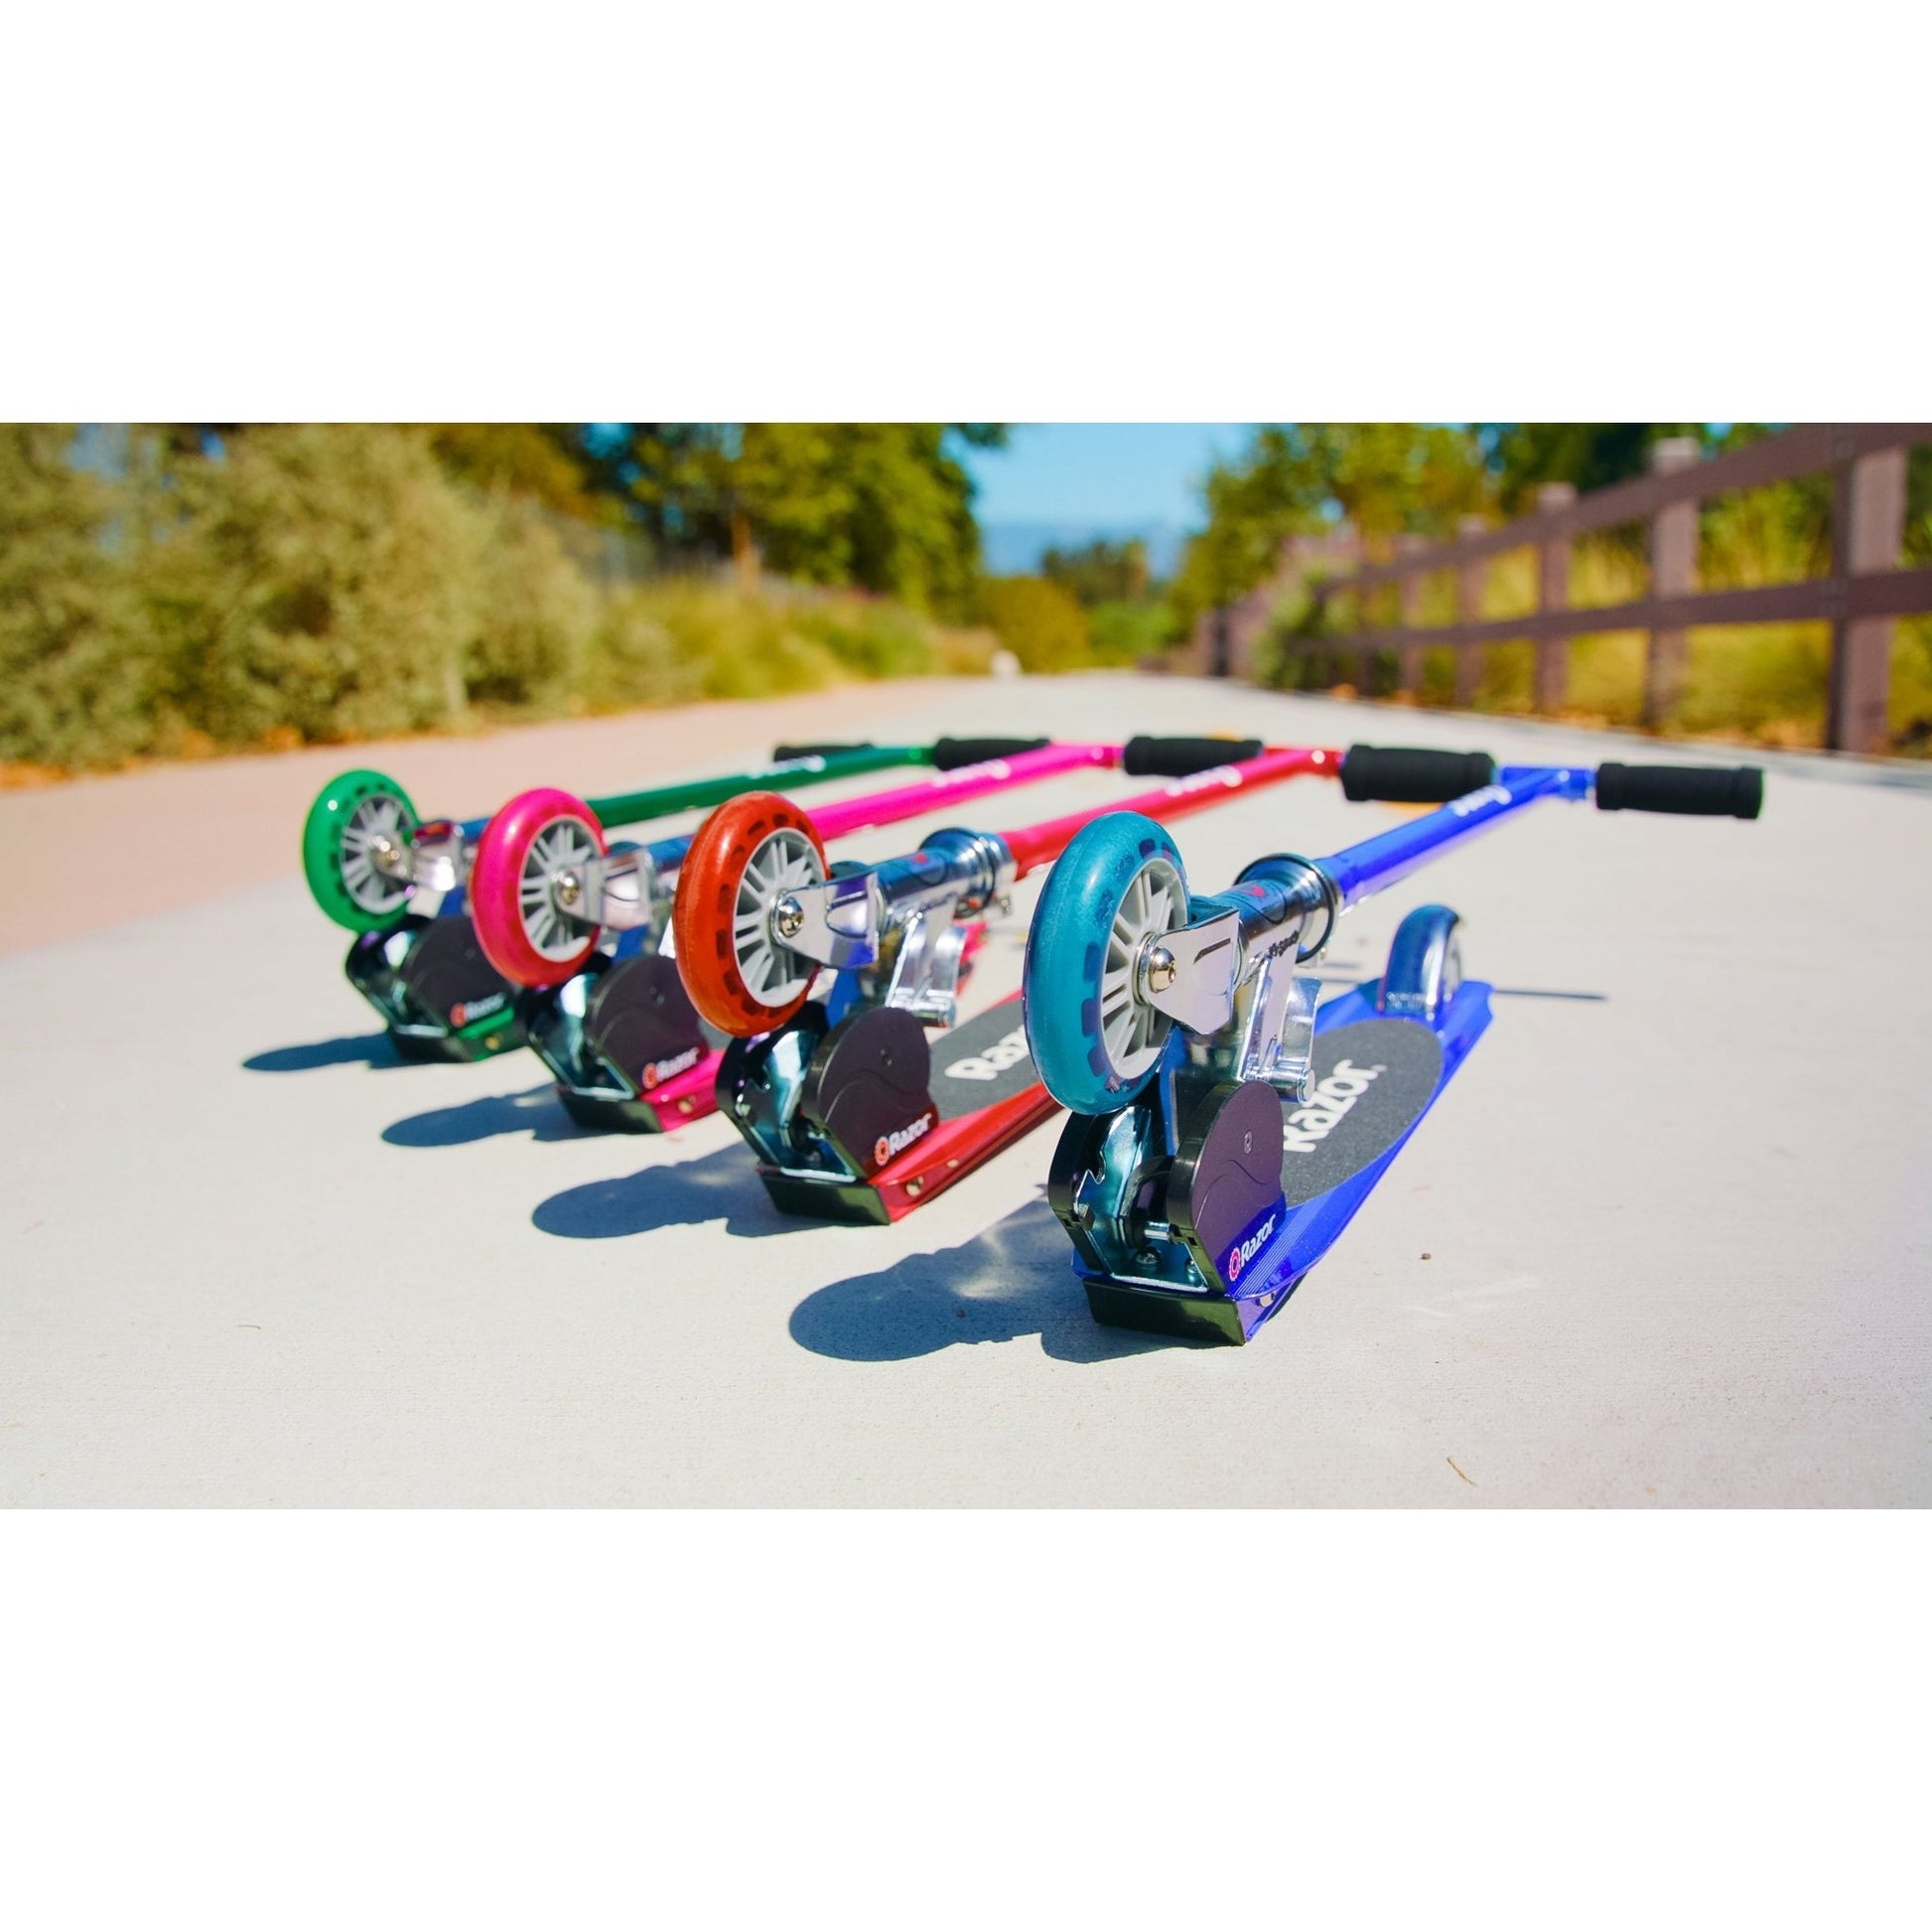 Razor S Sport Scooter - The Online Toy Shop - 2 Wheel Scooter - 13